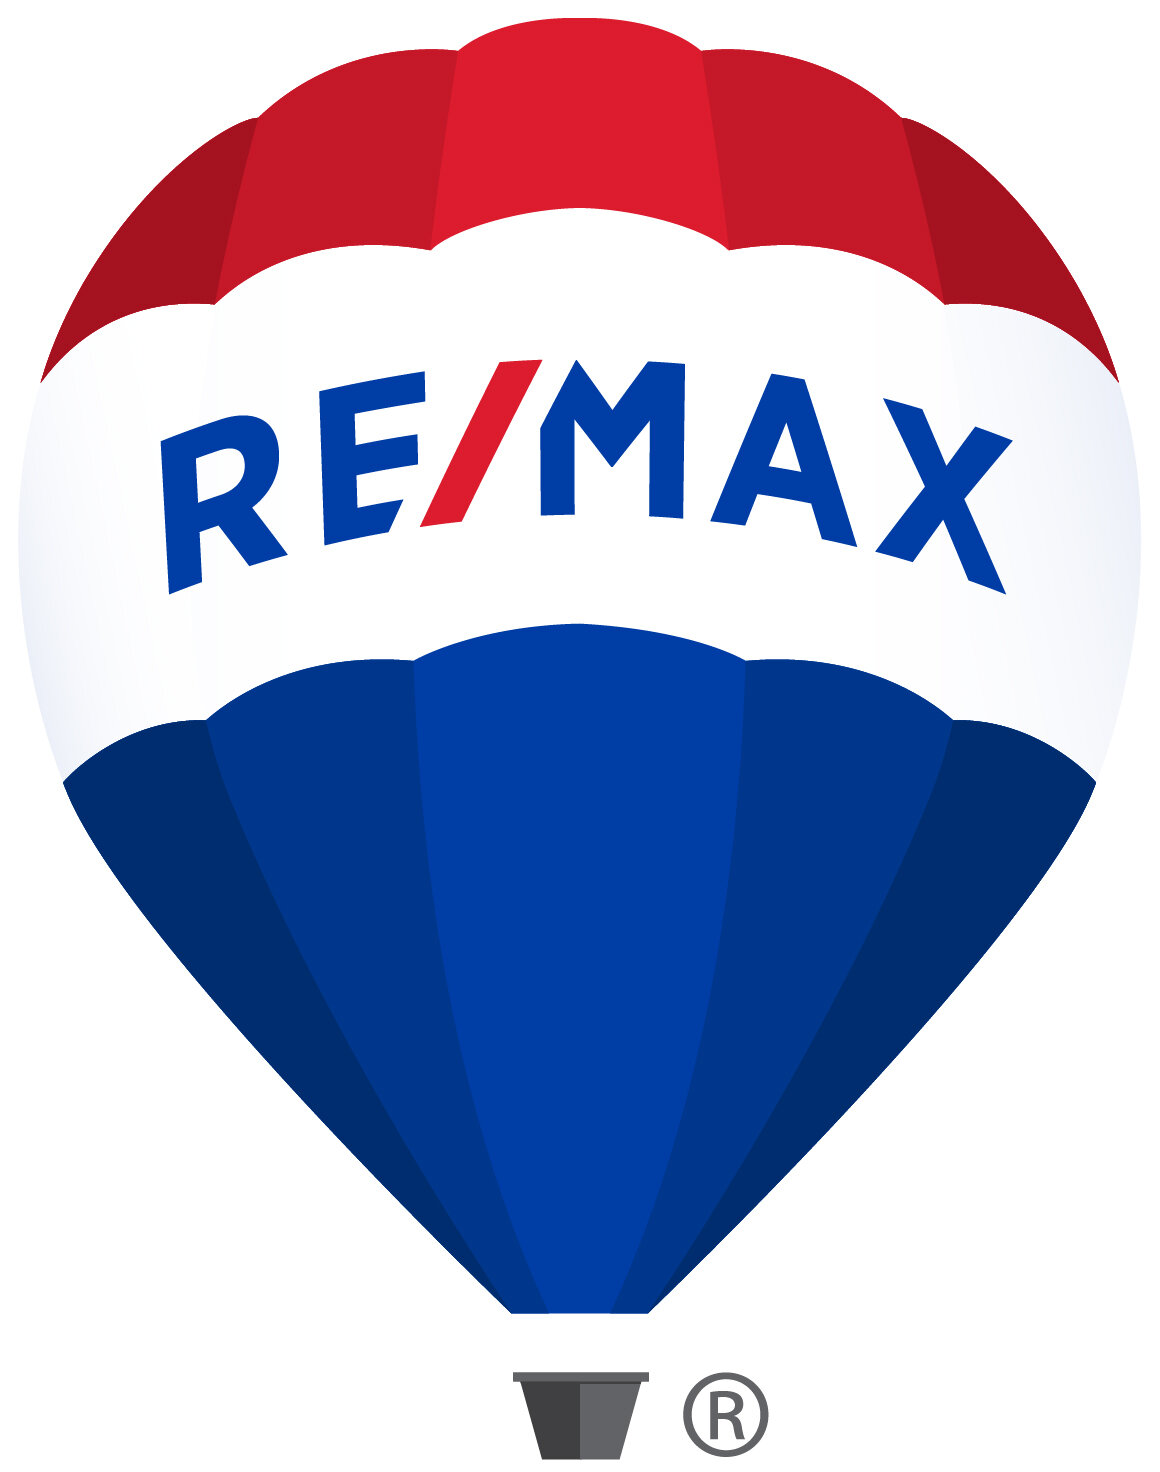  Remax At Your Service Reality 